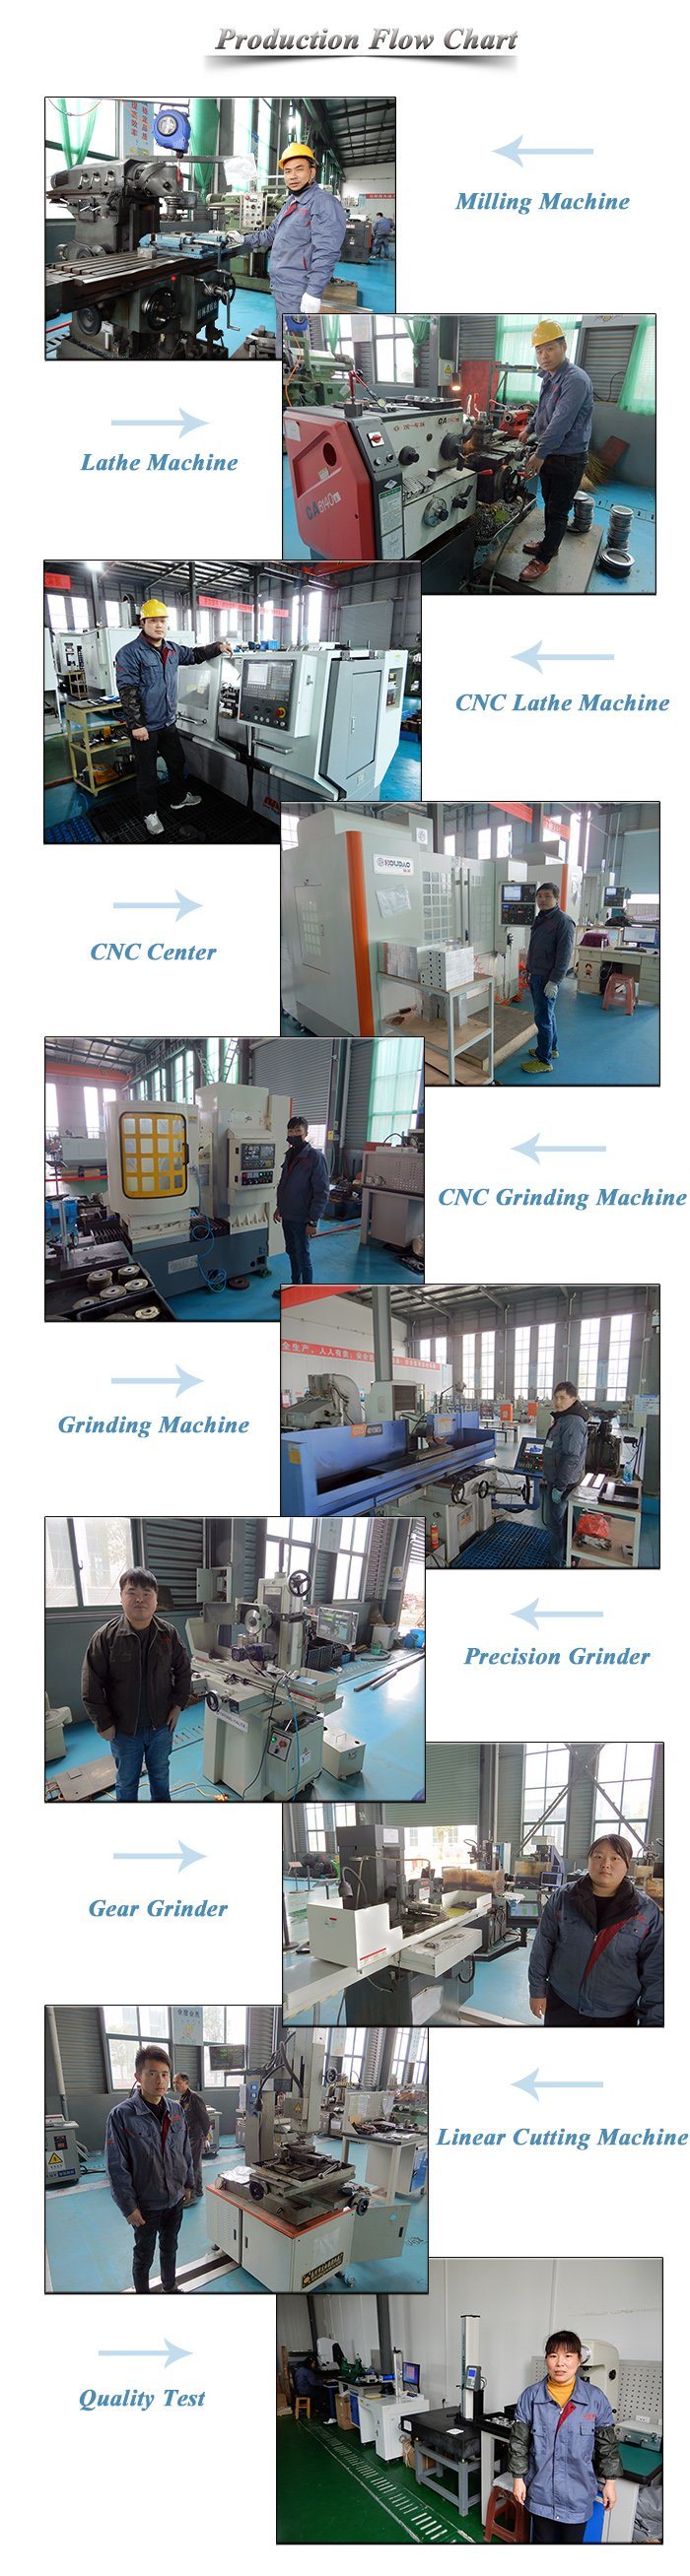 Slitting Blade, Slitting Blades, Slitting Knife, Slitting Knives, Take a Look Before I Say Those Again